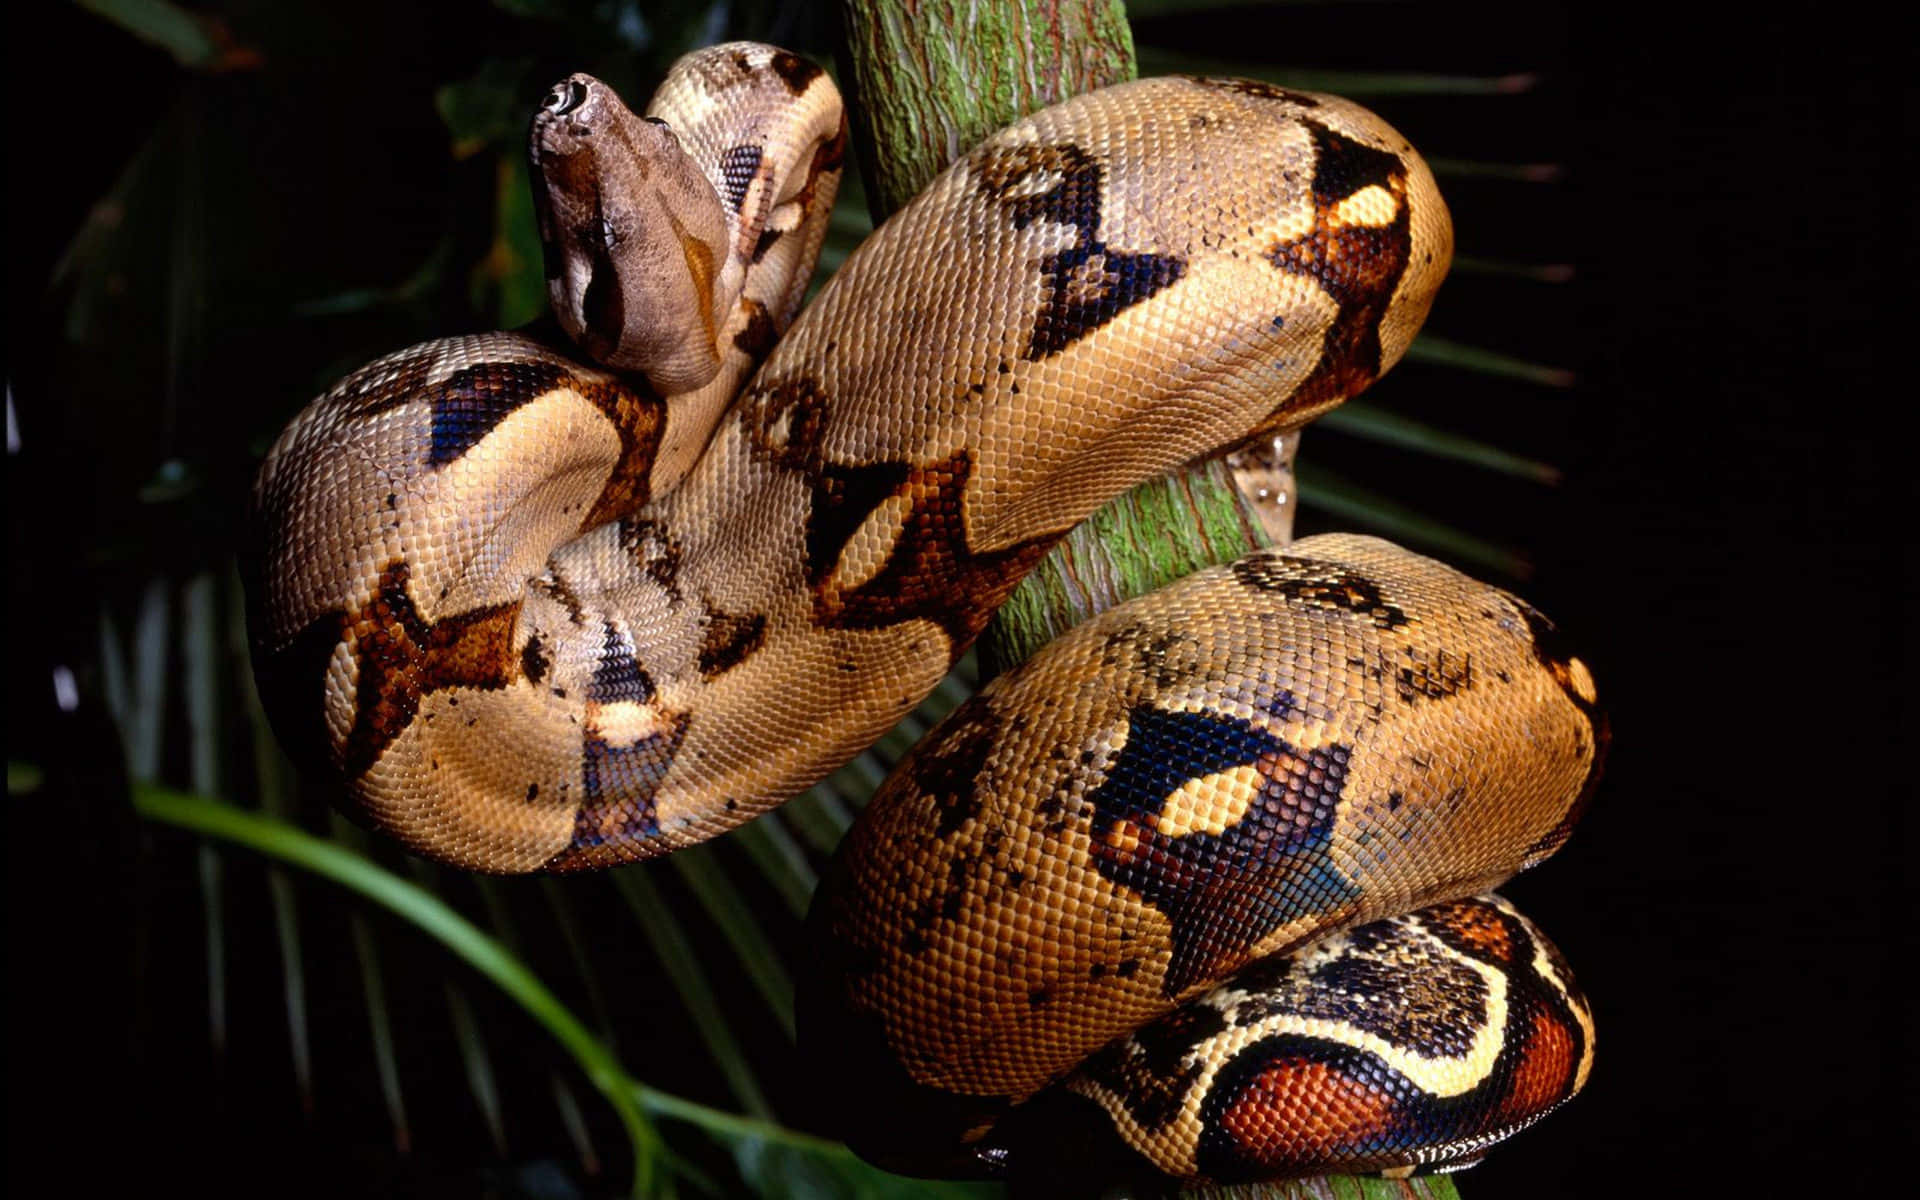 Close-up image of a Brown Snake in its natural habitat Wallpaper